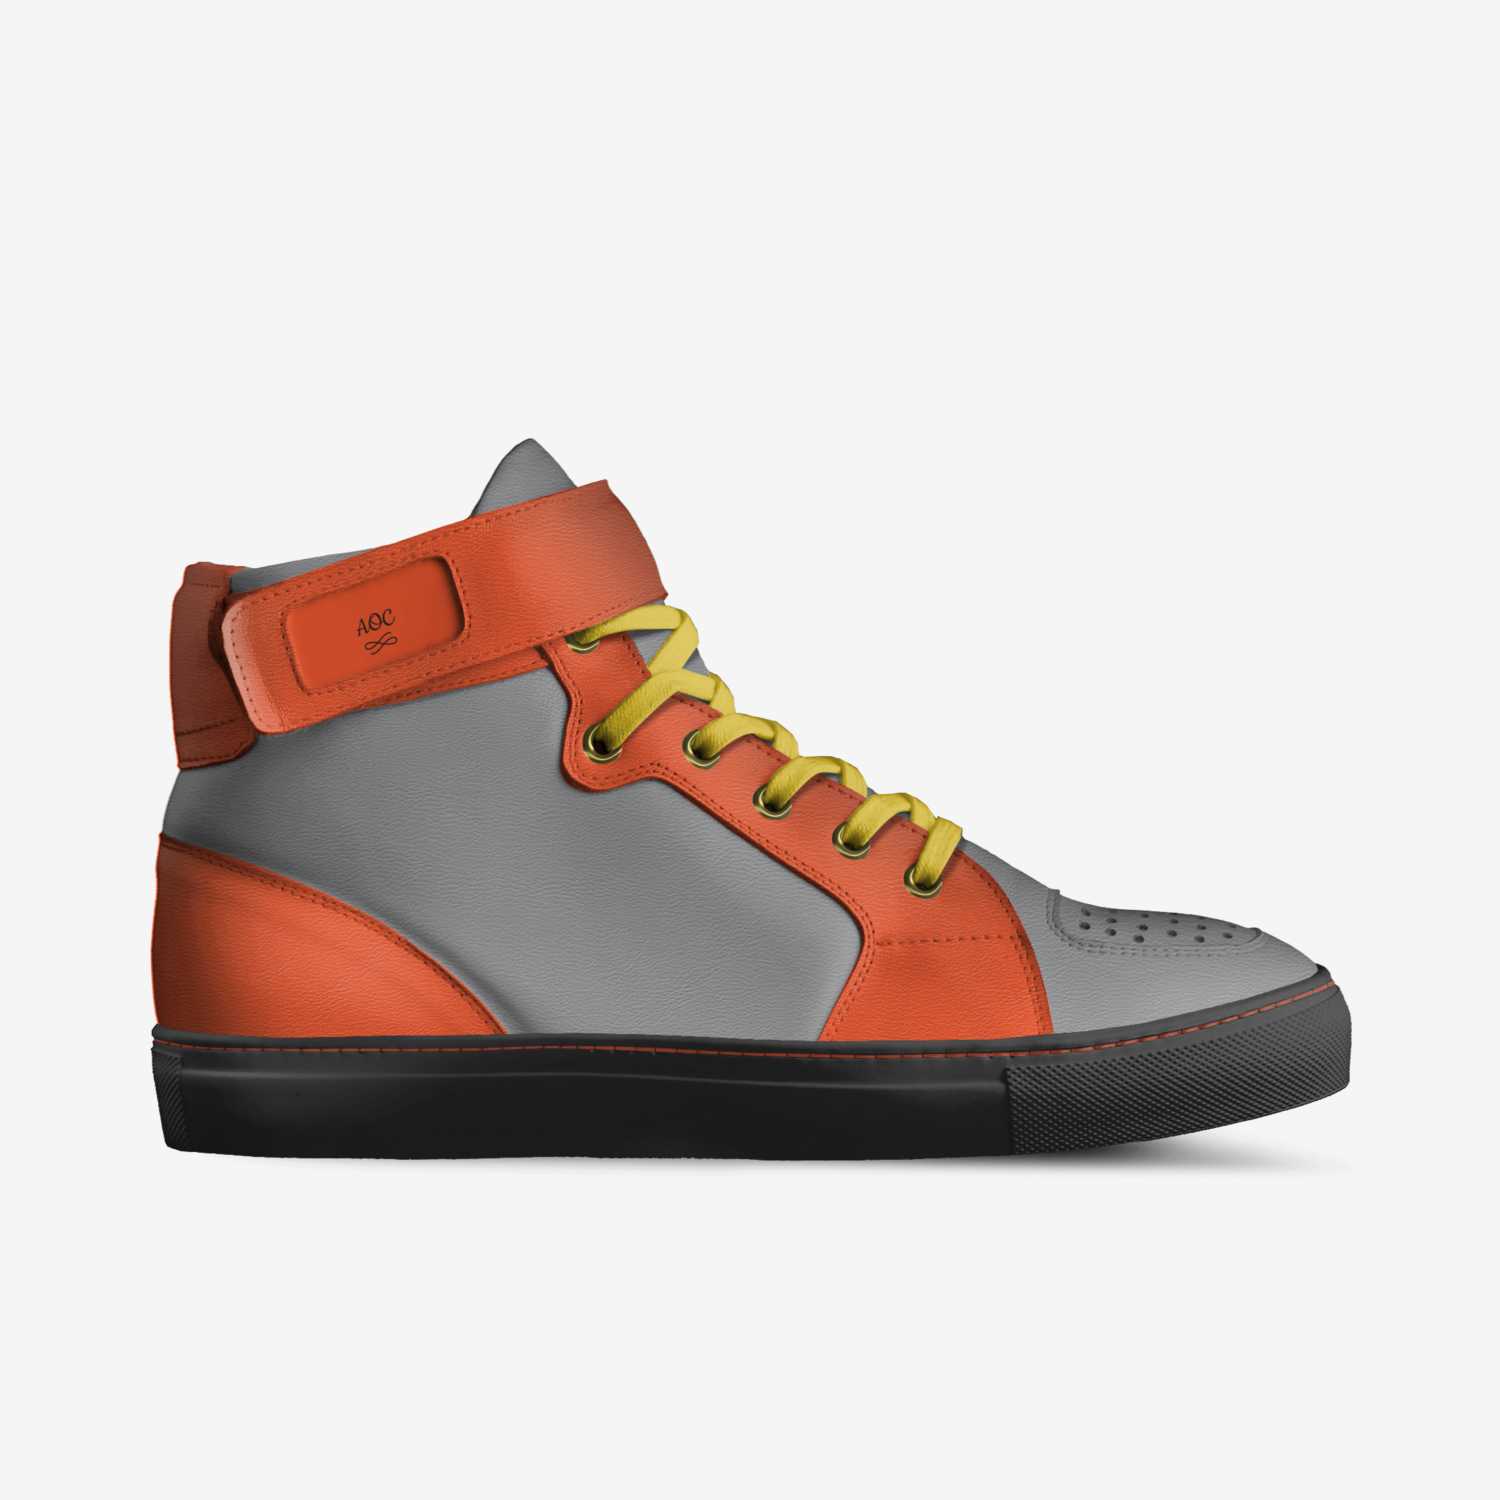 AOC | A Custom Shoe concept by Ken Younger